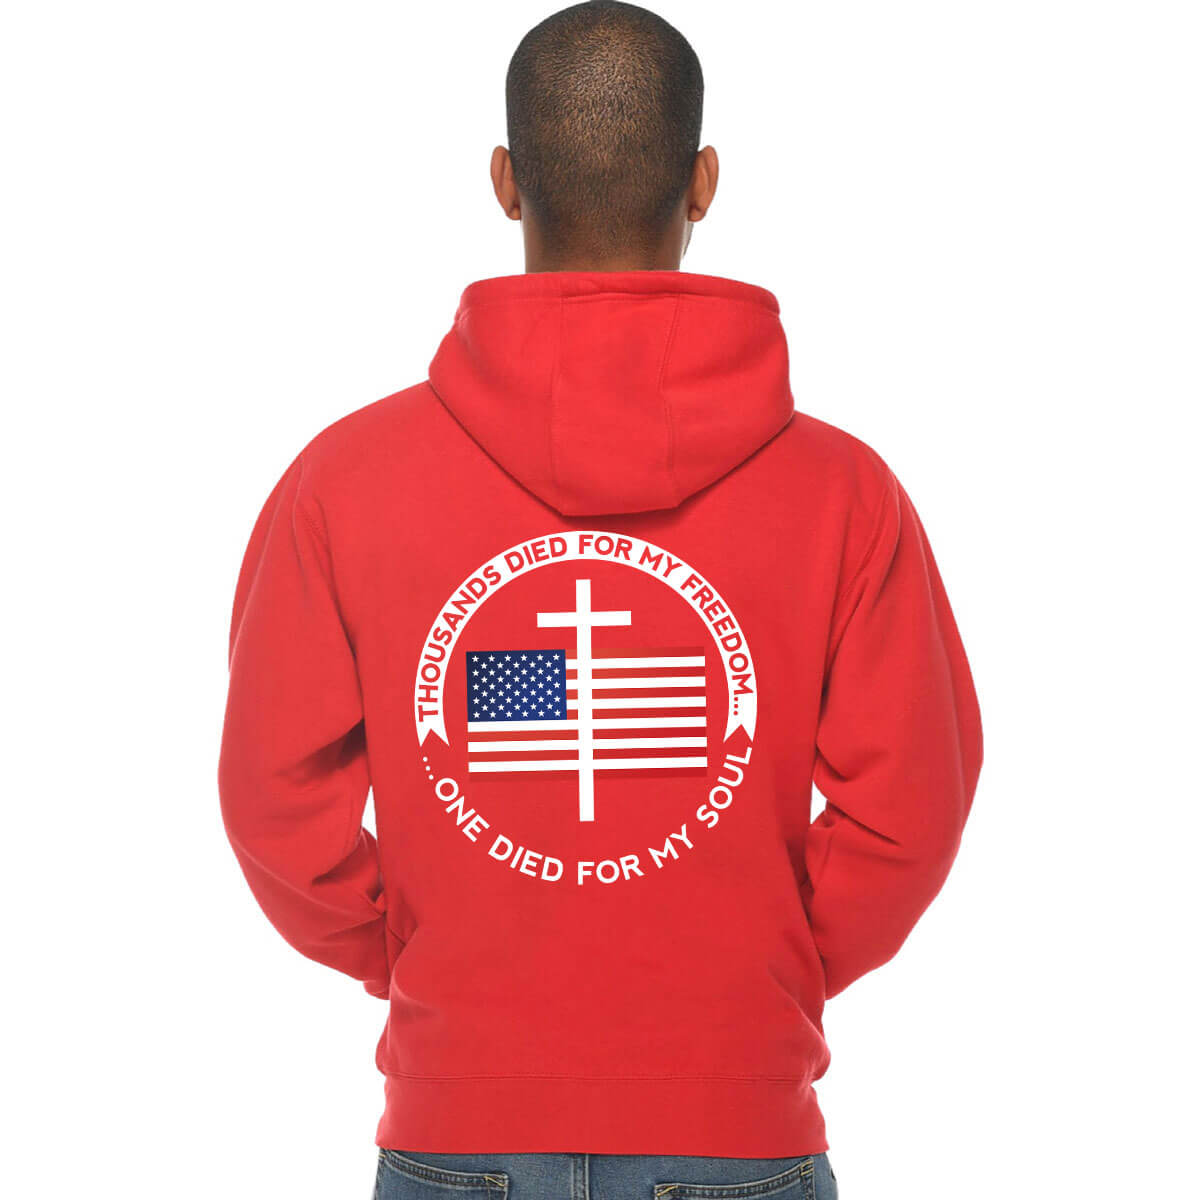 Thousands Died For My Freedom One Died For My Soul Men's Full Zip Sweatshirt Hoodie